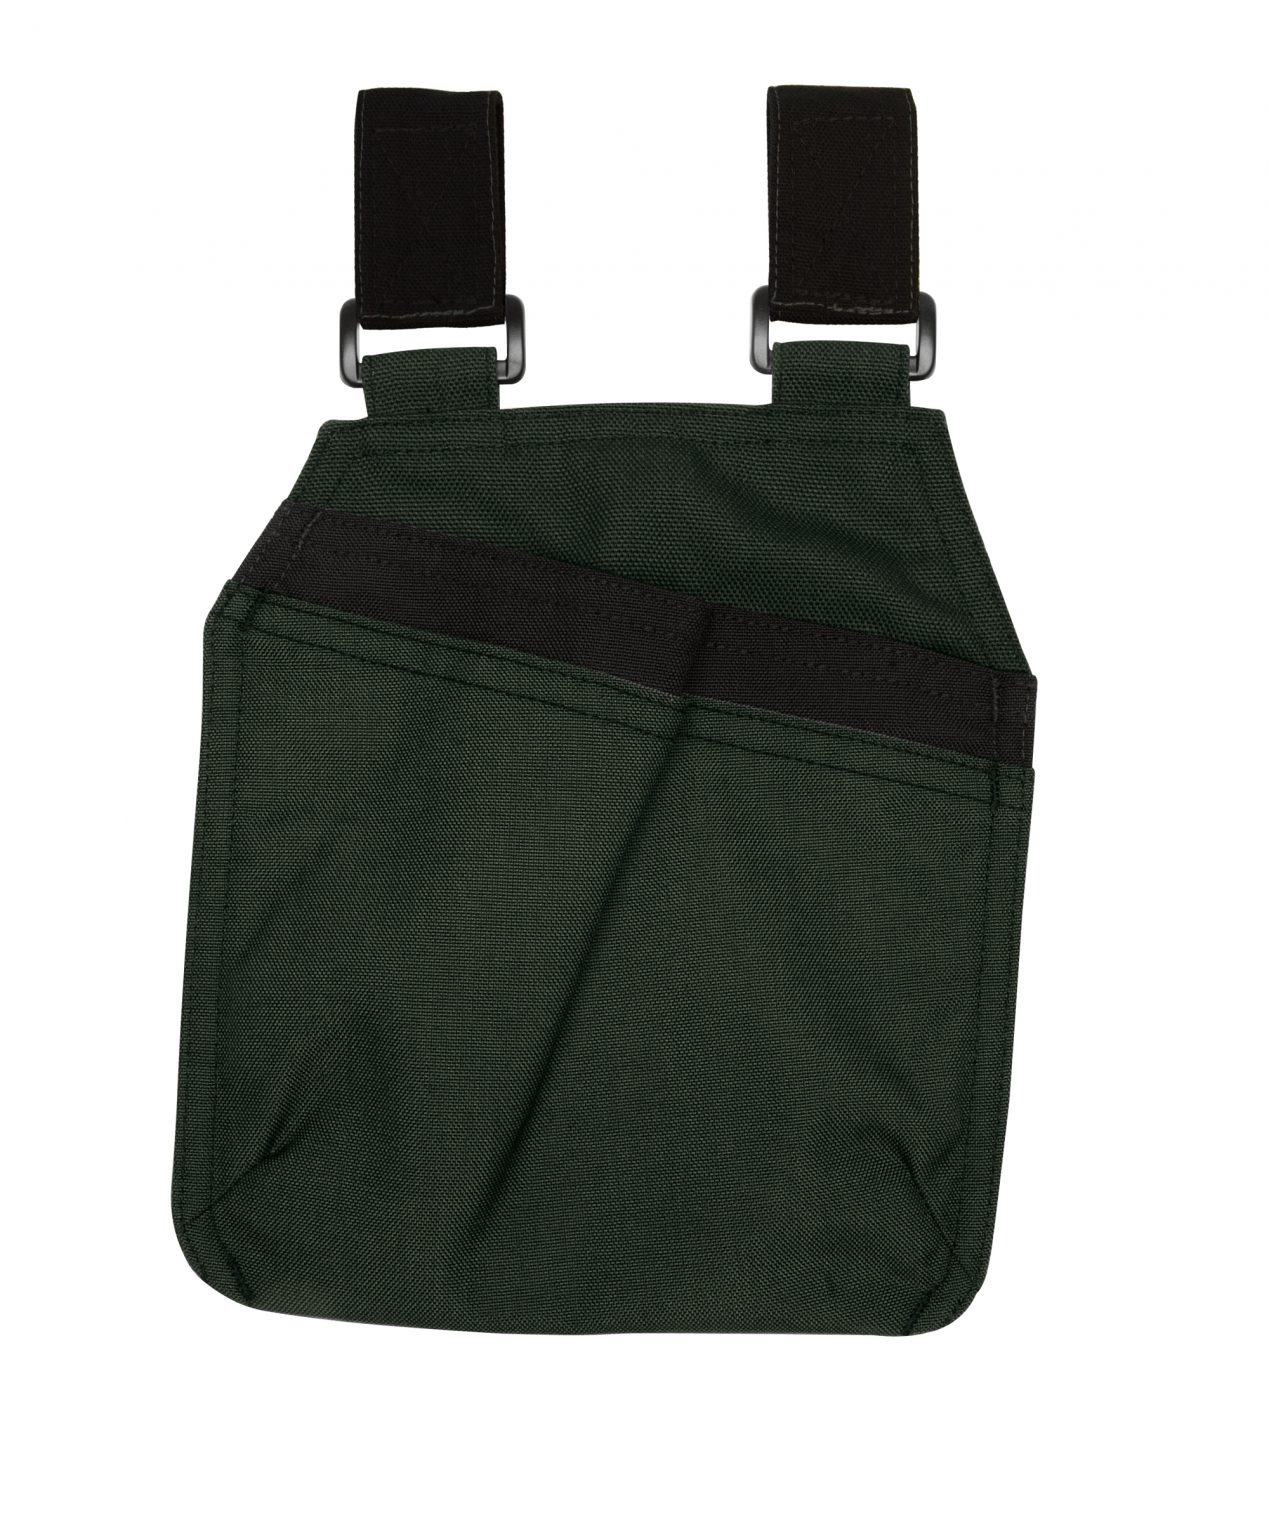 gordon with loops canvas tool pouches per pair with velcro loops moss green black back